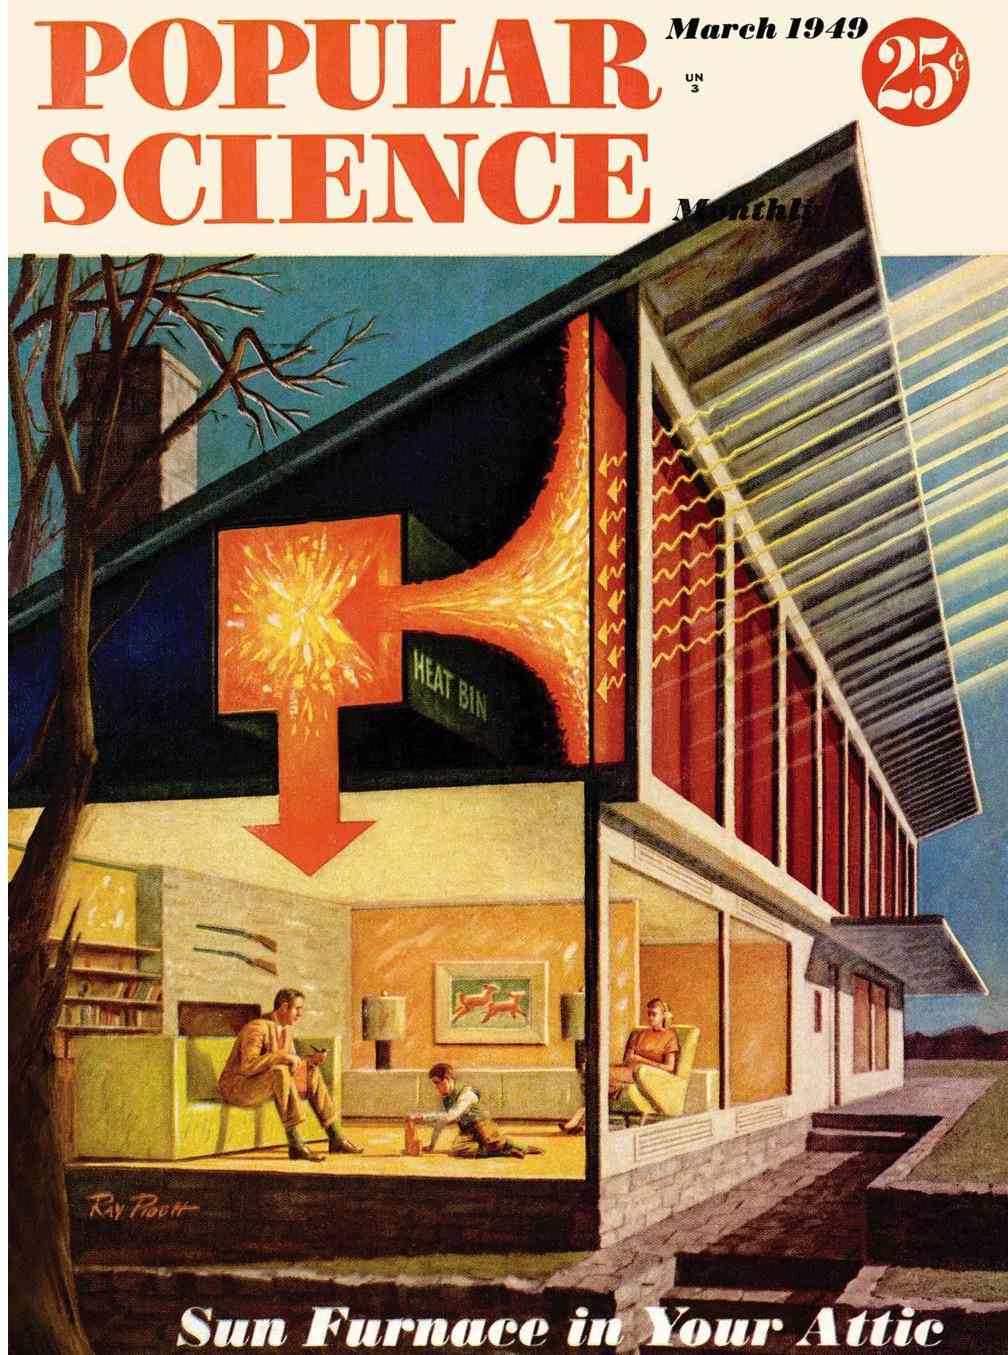 Popular Science Cover depicting the Dover Sun House, the first house heated by solar energy.